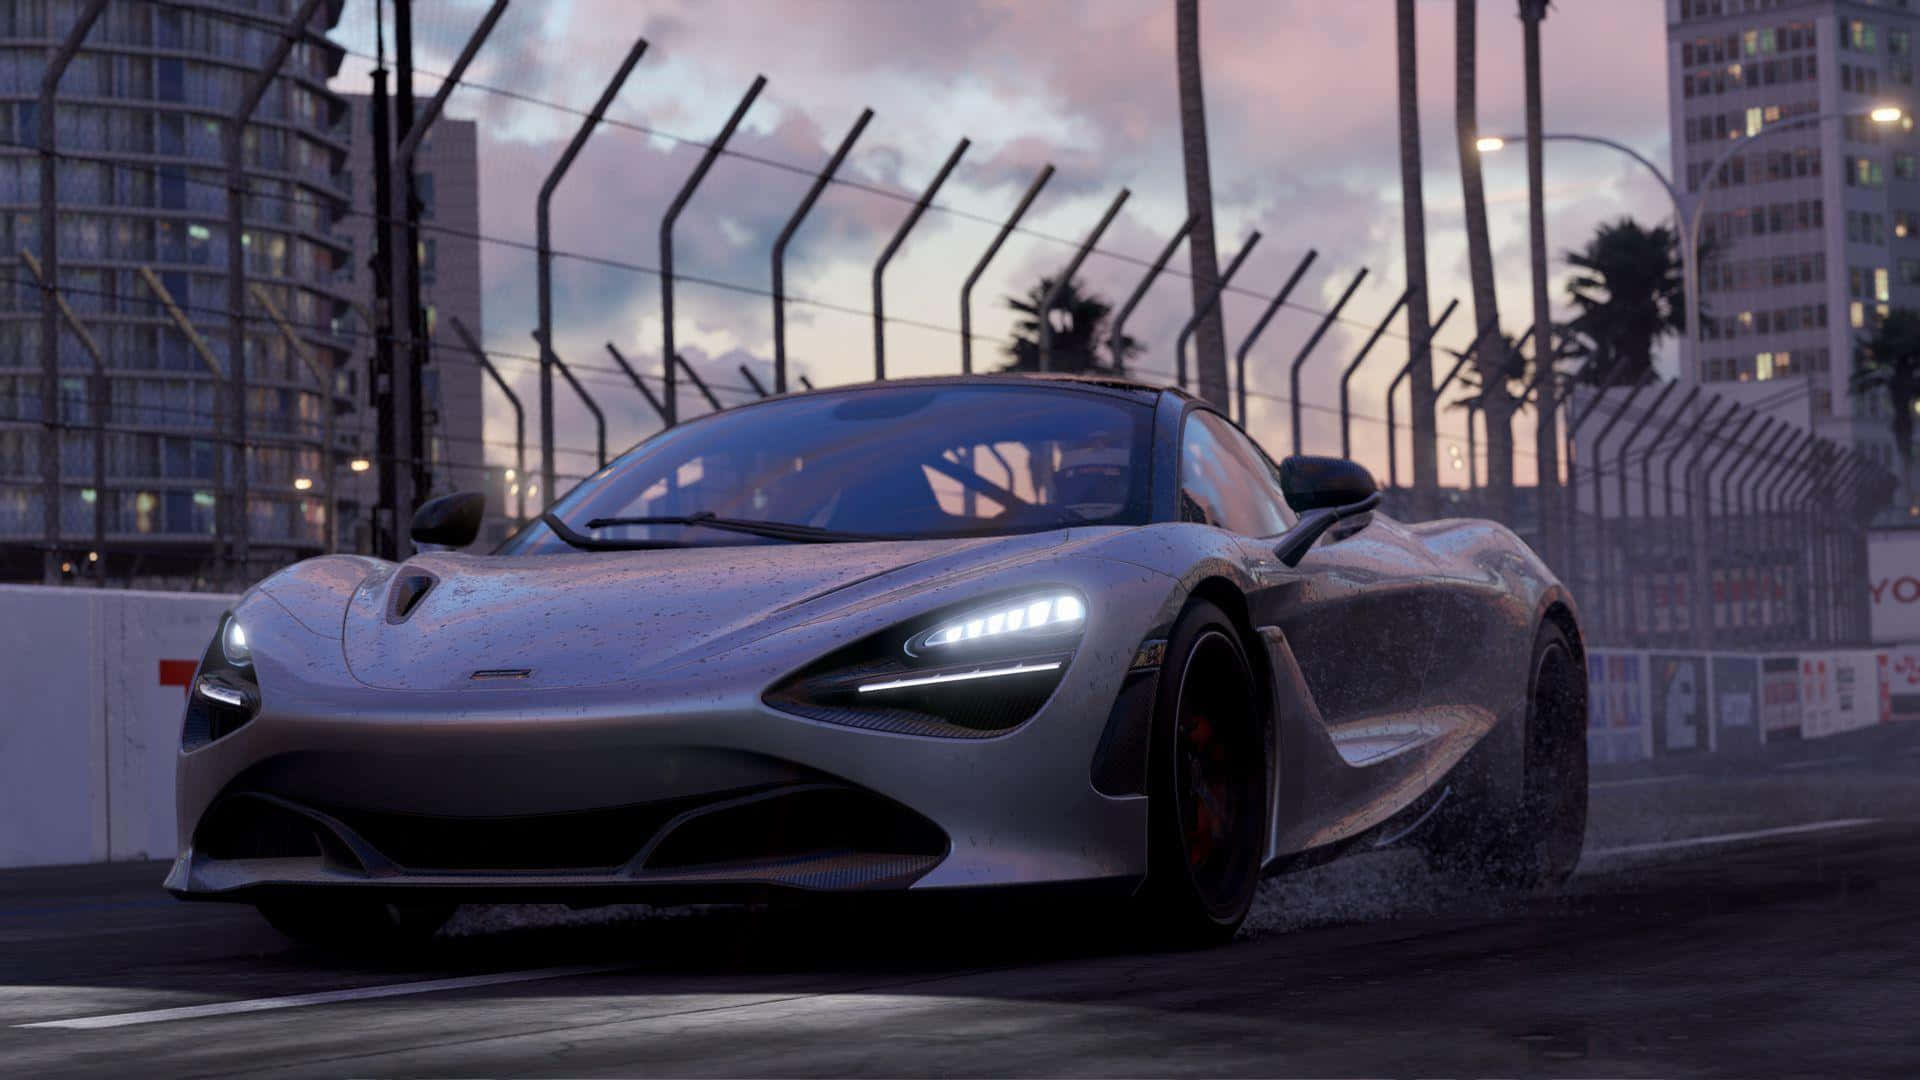 Build the Ultimate Racer with Best Project Cars 2